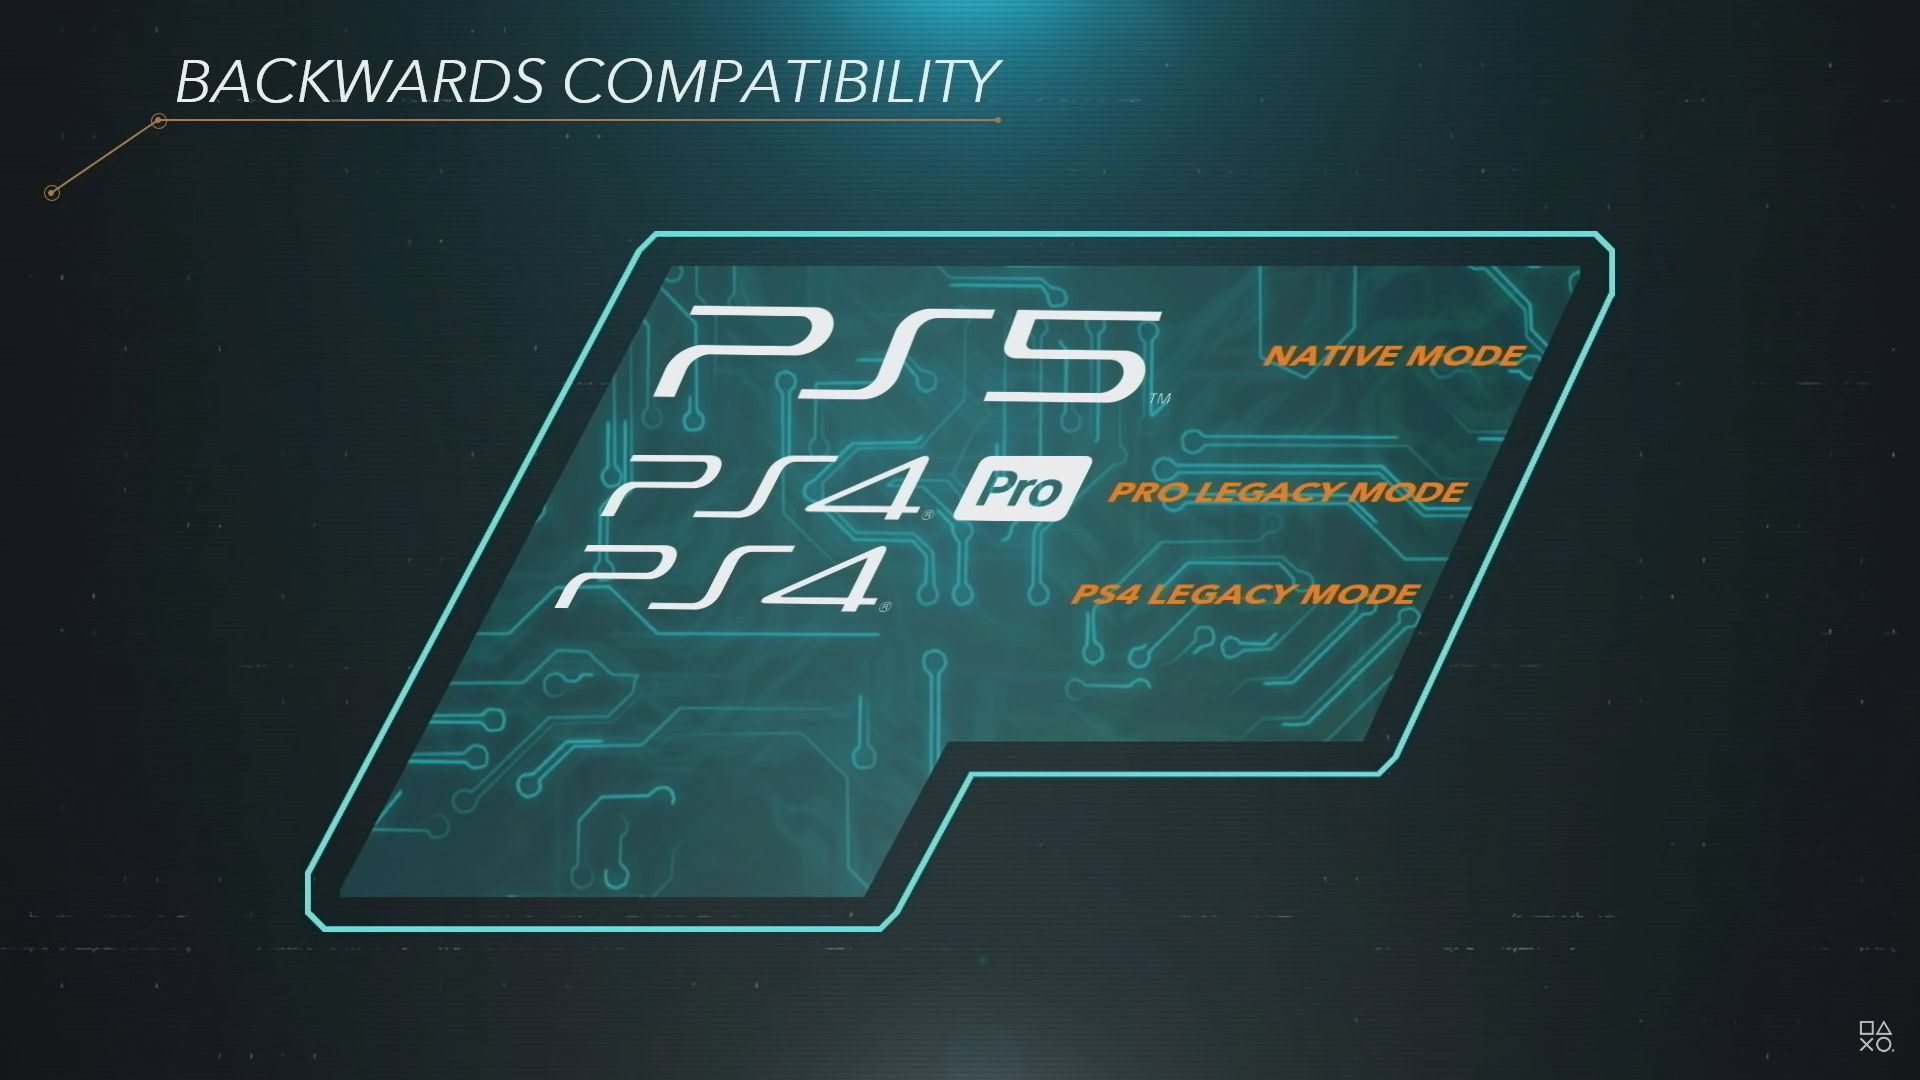 Is the backwards compatible with PS2, PS3, and PS4 games?